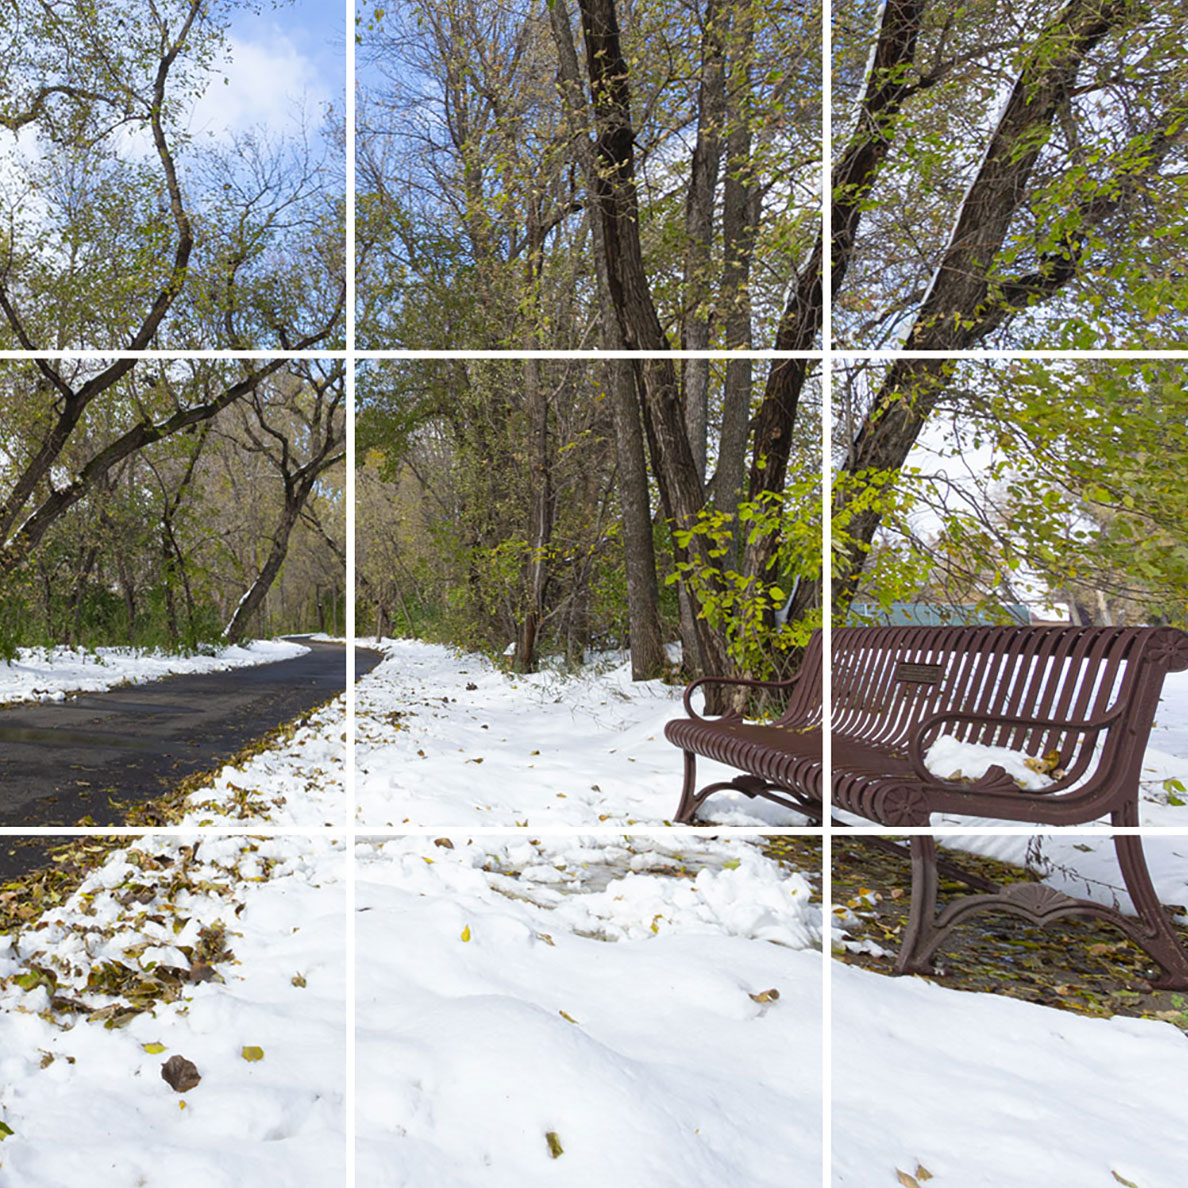 A three row by three column grid laid out on an image of a snow covered park and trees with a walking path placed in the left third of the grid and a bench placed in the right third of the grid depicts the use of the Rule-of-Thirds in landscape photography.